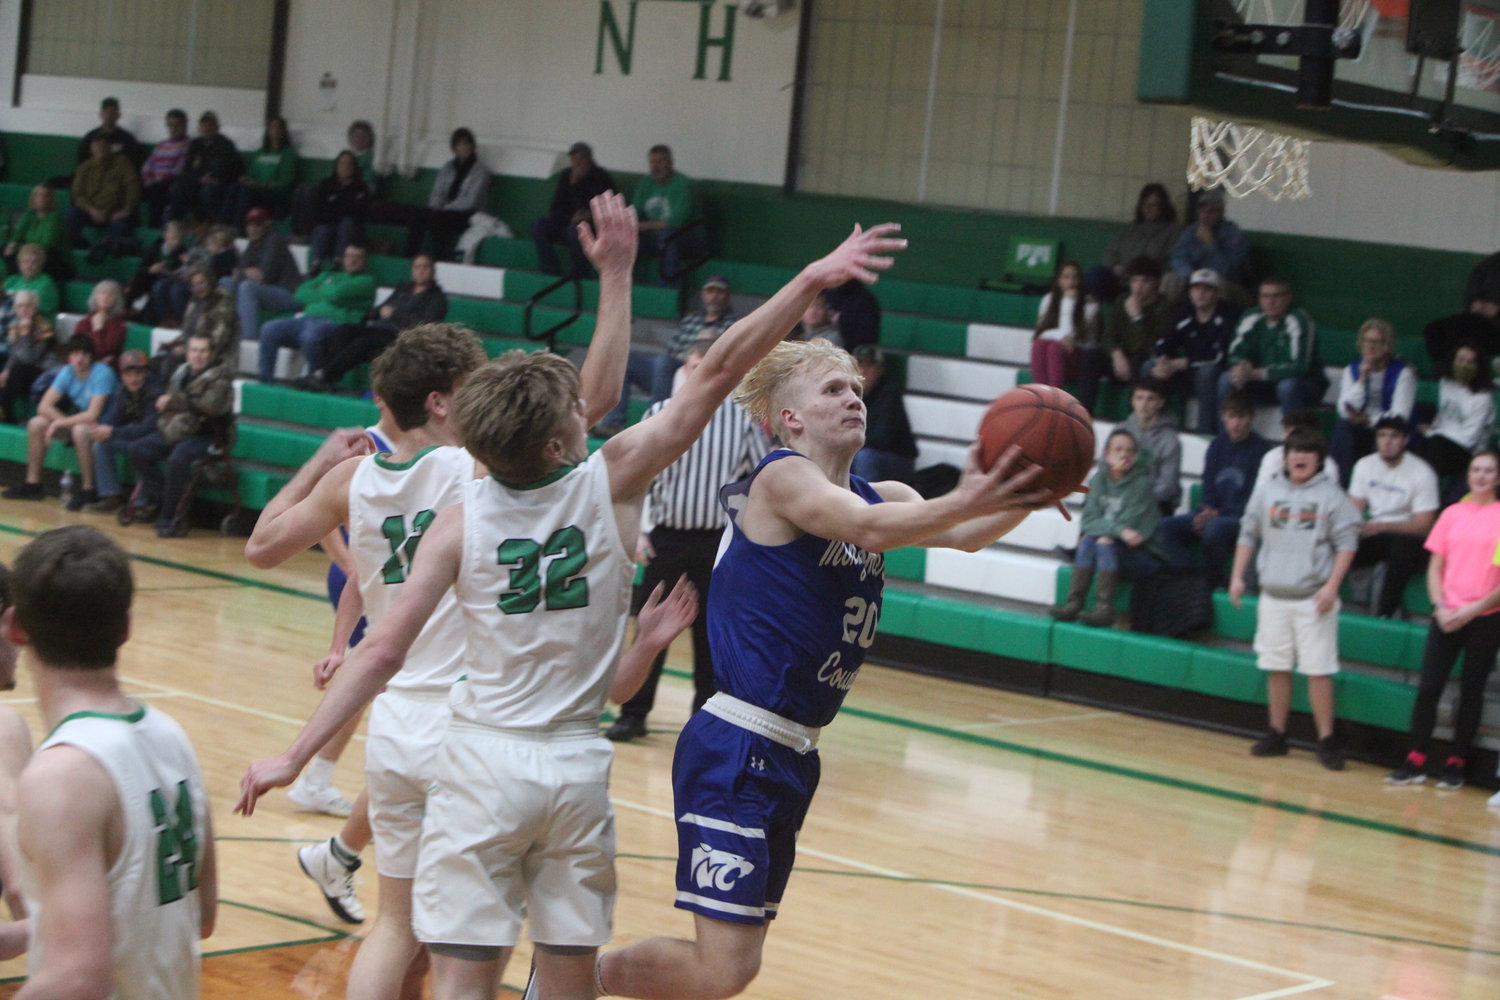 Montgomery County freshman Tyler Erwin goes for a shot in the first quarter against the New Haven Shamrocks on Jan. 7. Erwin and the Wildcats lost to New Haven 37-36.